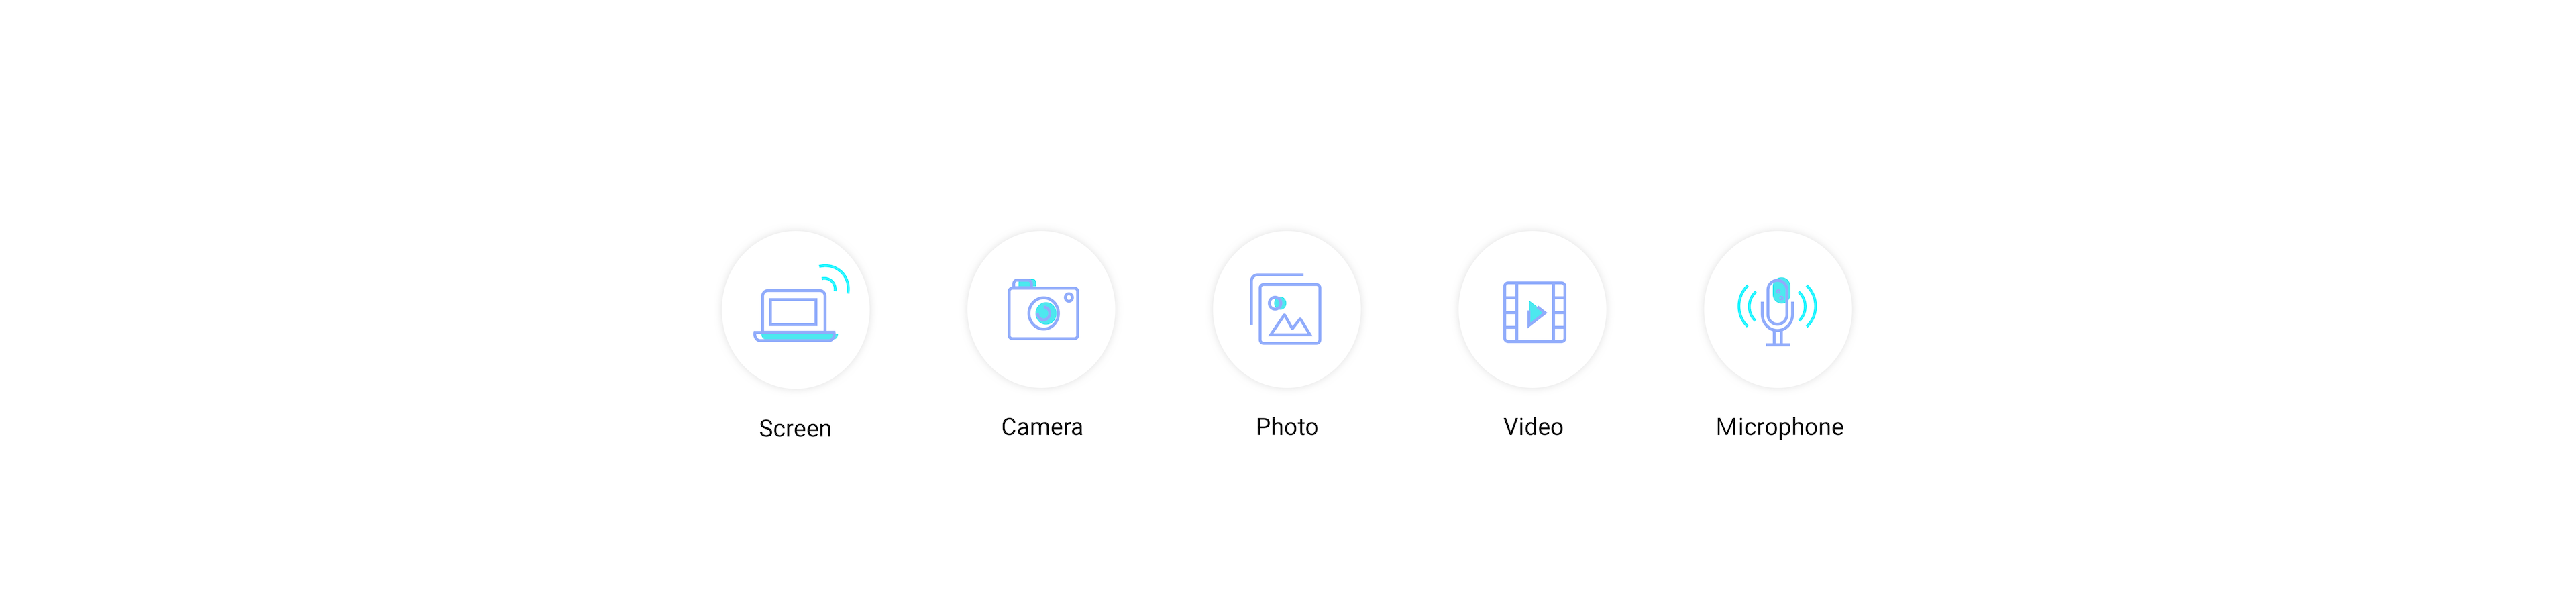 Share different types of content, Camera, Photo, Video, Microphone, Media Files